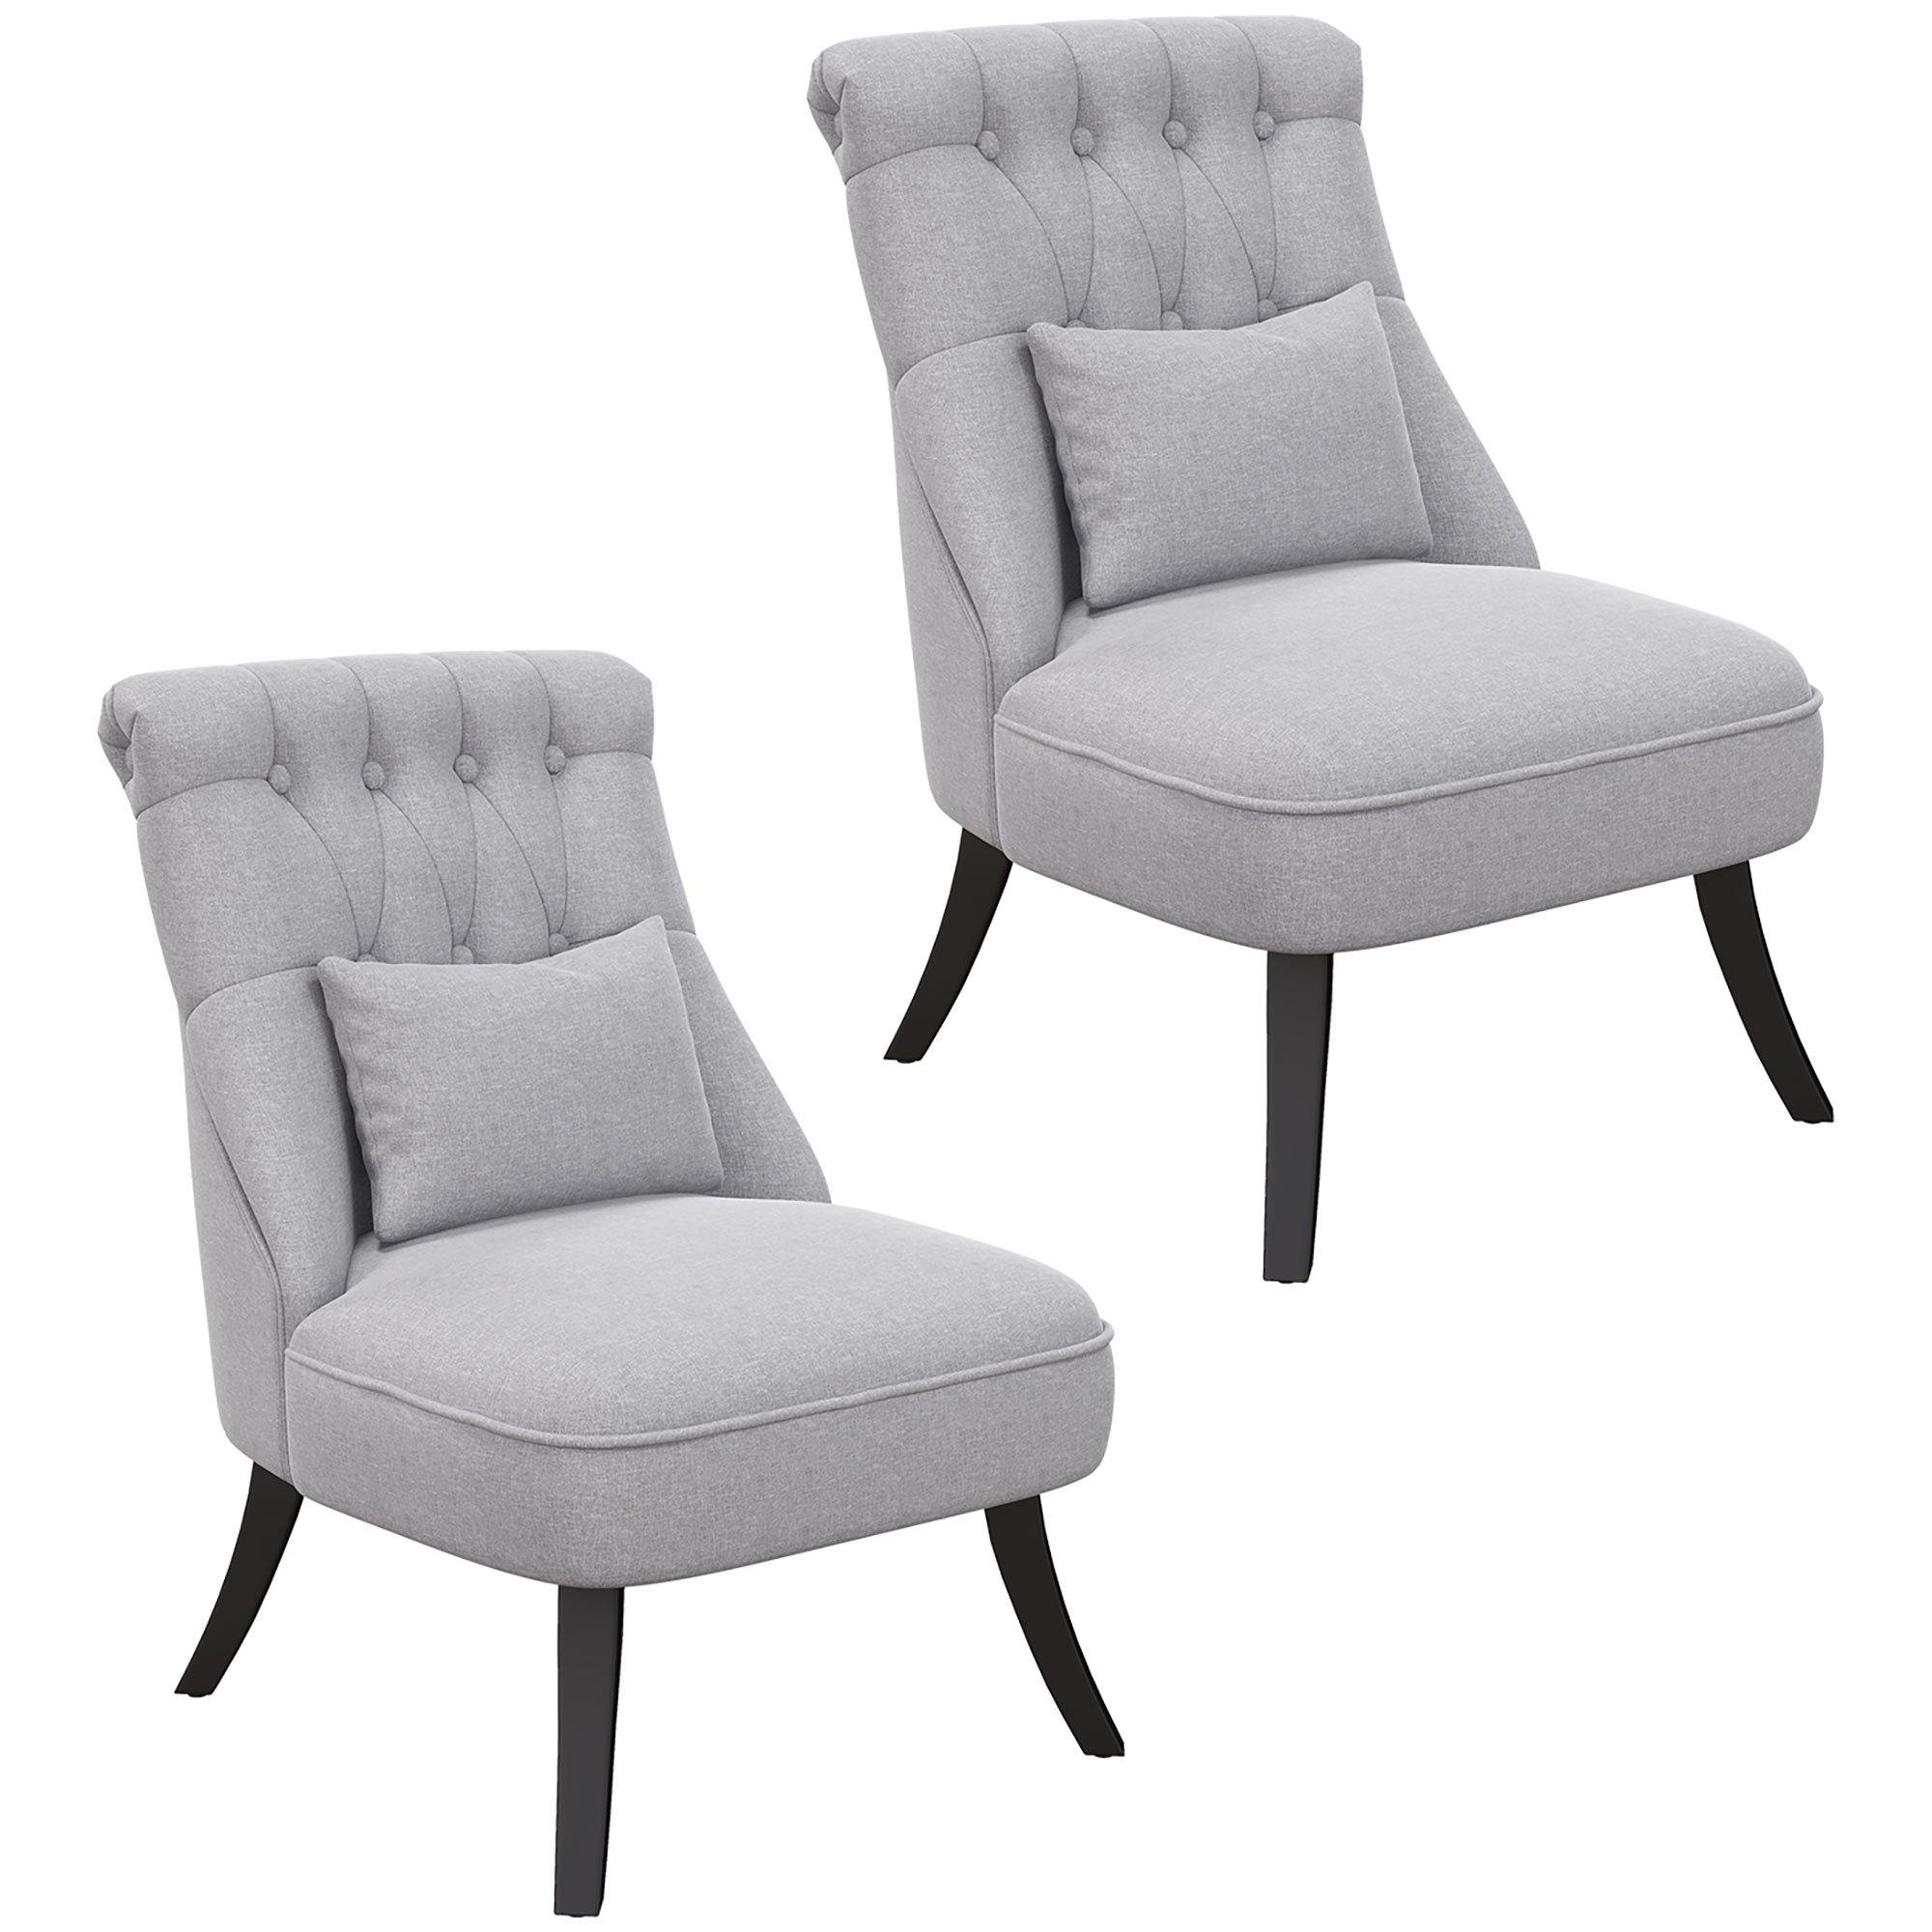 Fabric Single Sofa Upholstered Dining Chair with Pillow Wood Legs